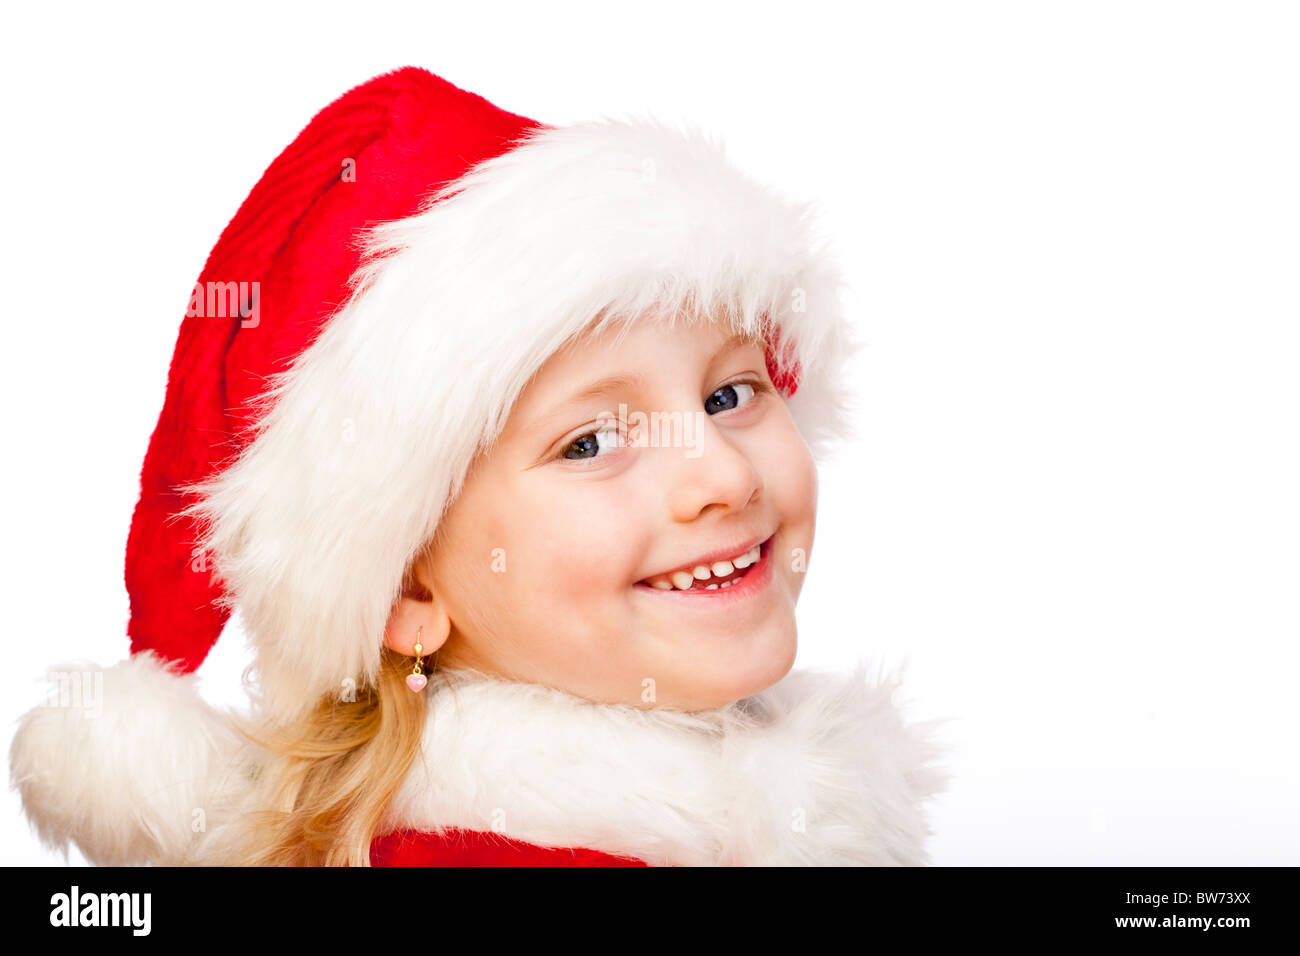 Small girl dressed as Santa Claus smiles happy into camera. Isolated on white background. Stock Photo